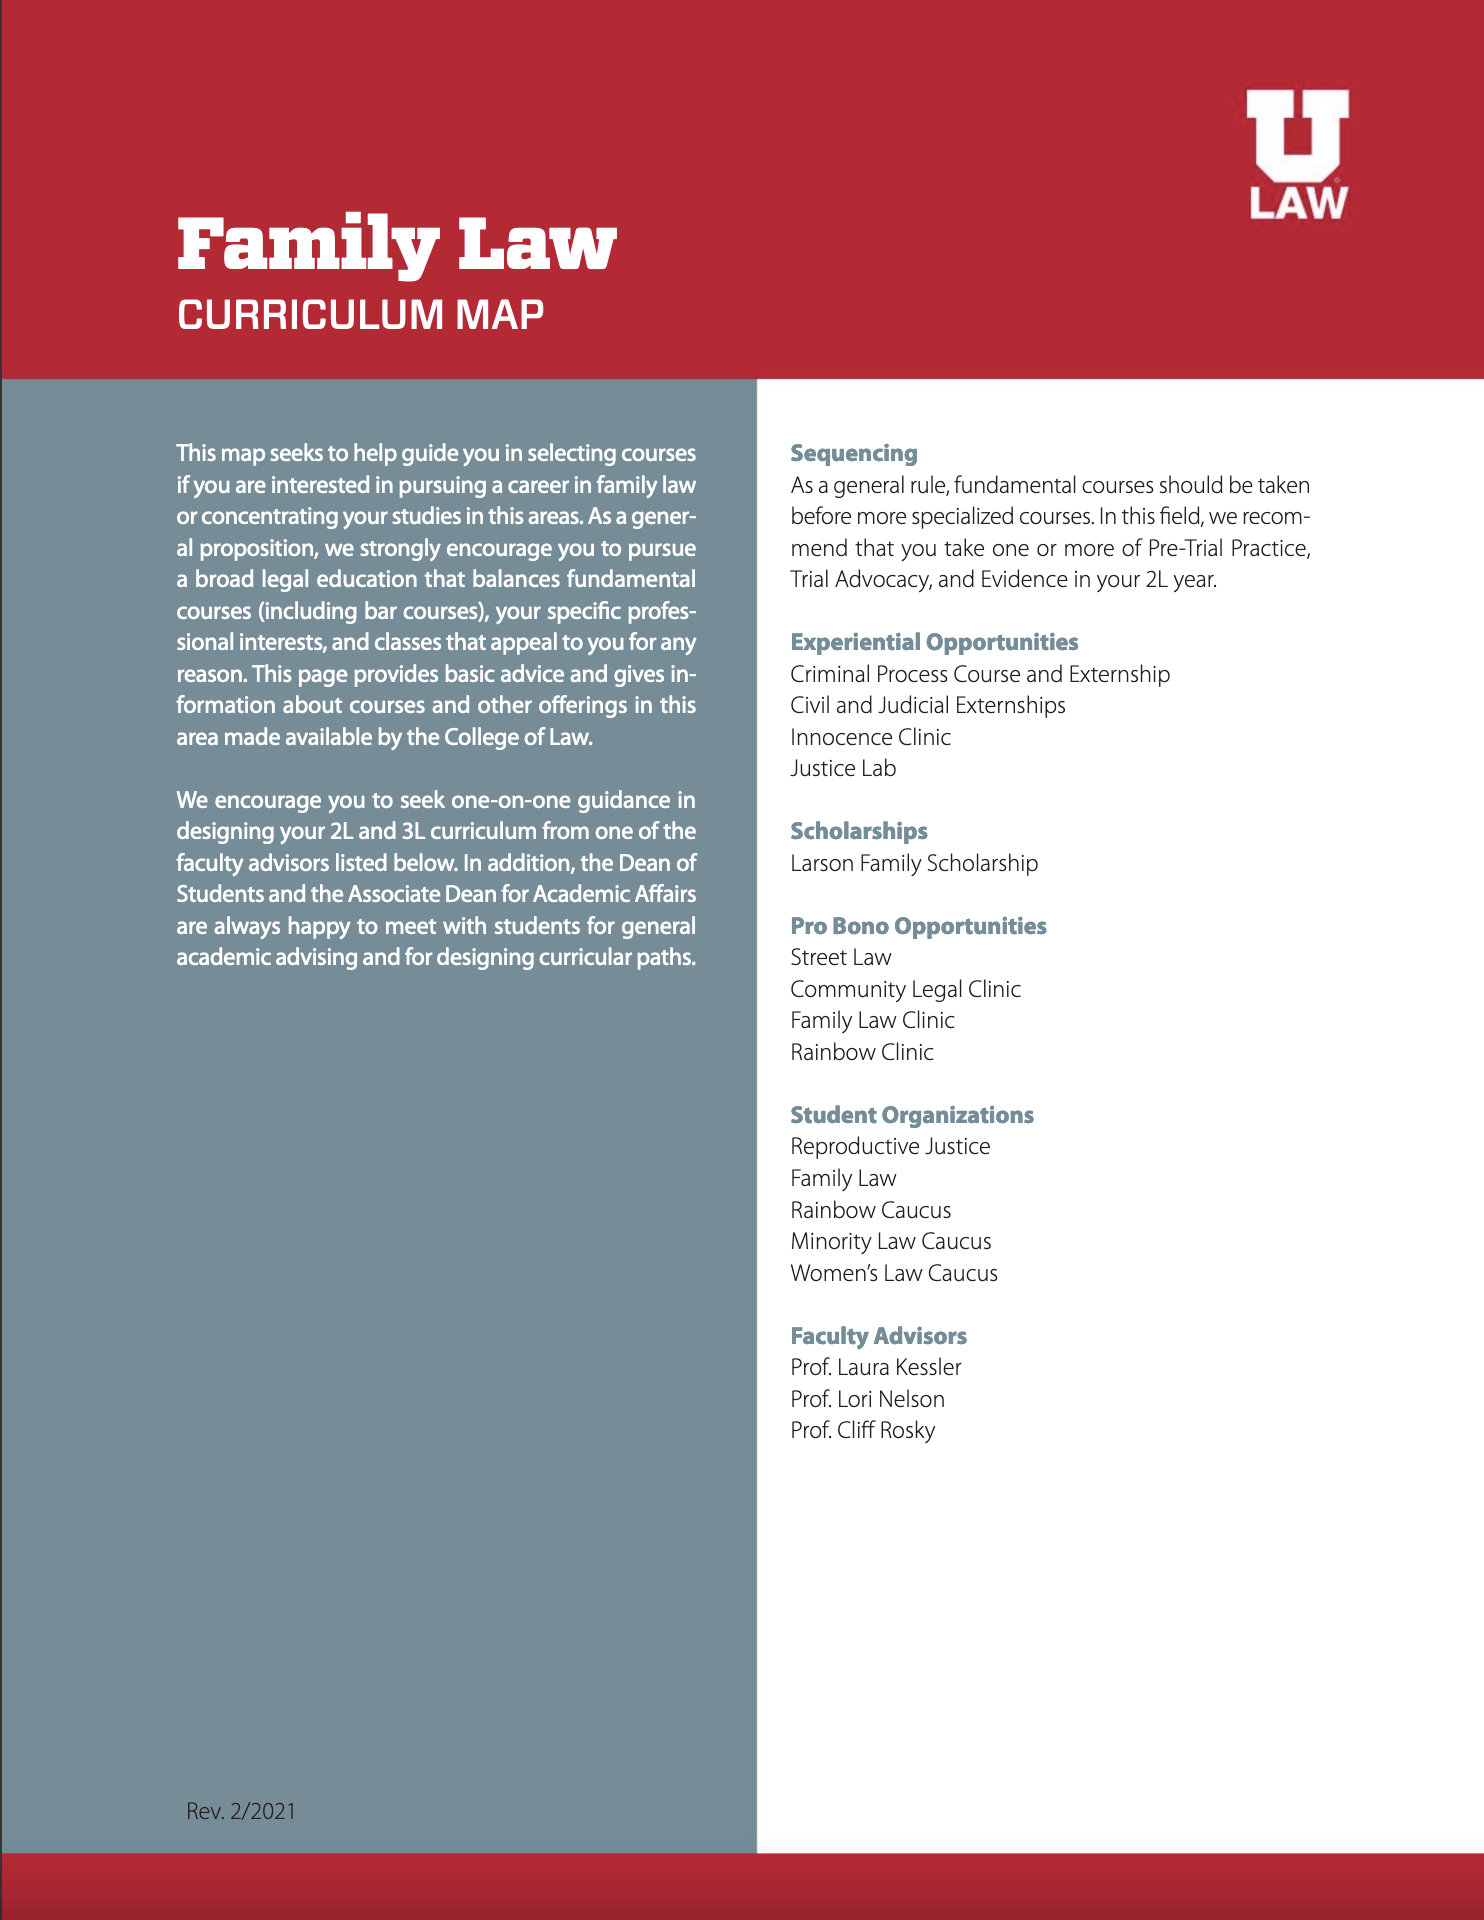 Family Law Curriculum Map